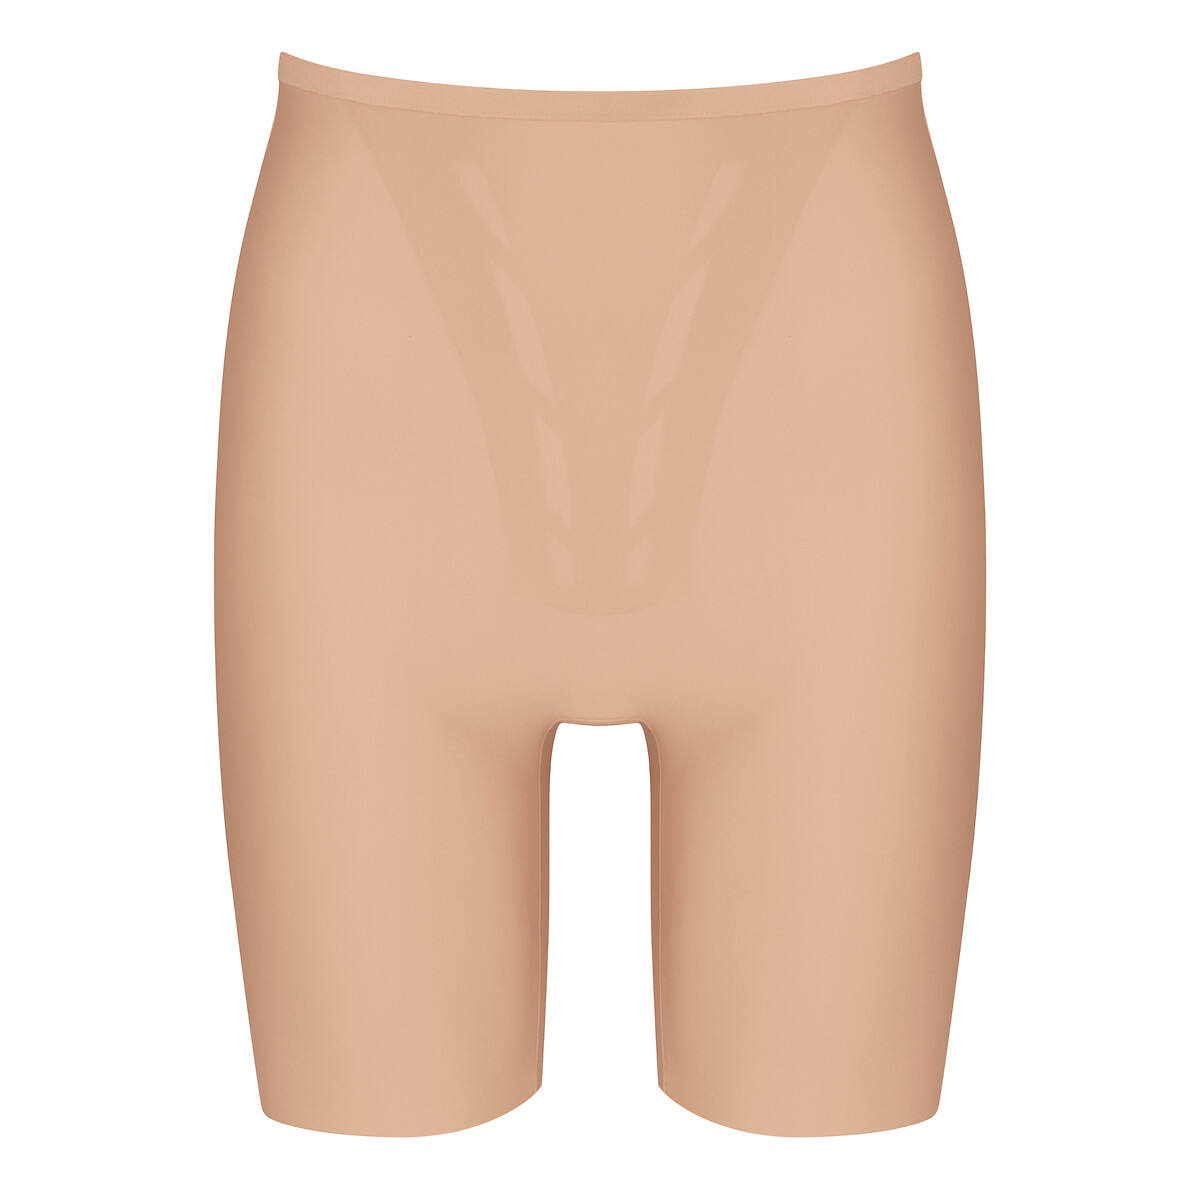 Shape smart shorts with a second skin feel Triumph